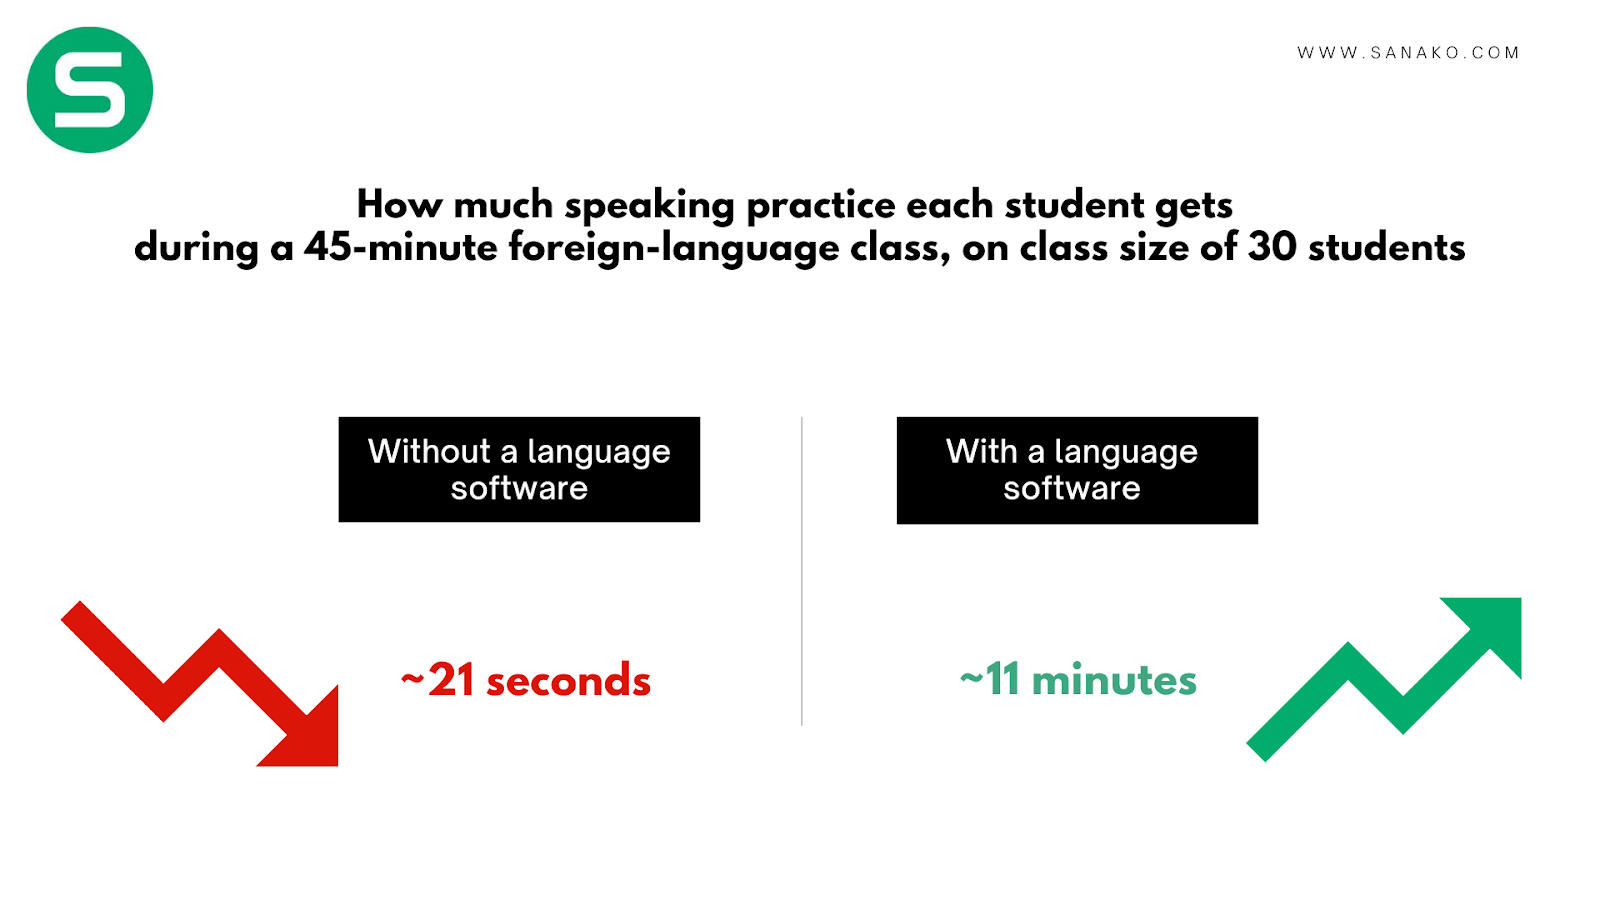 language teaching software inceares time spent on speaking activities